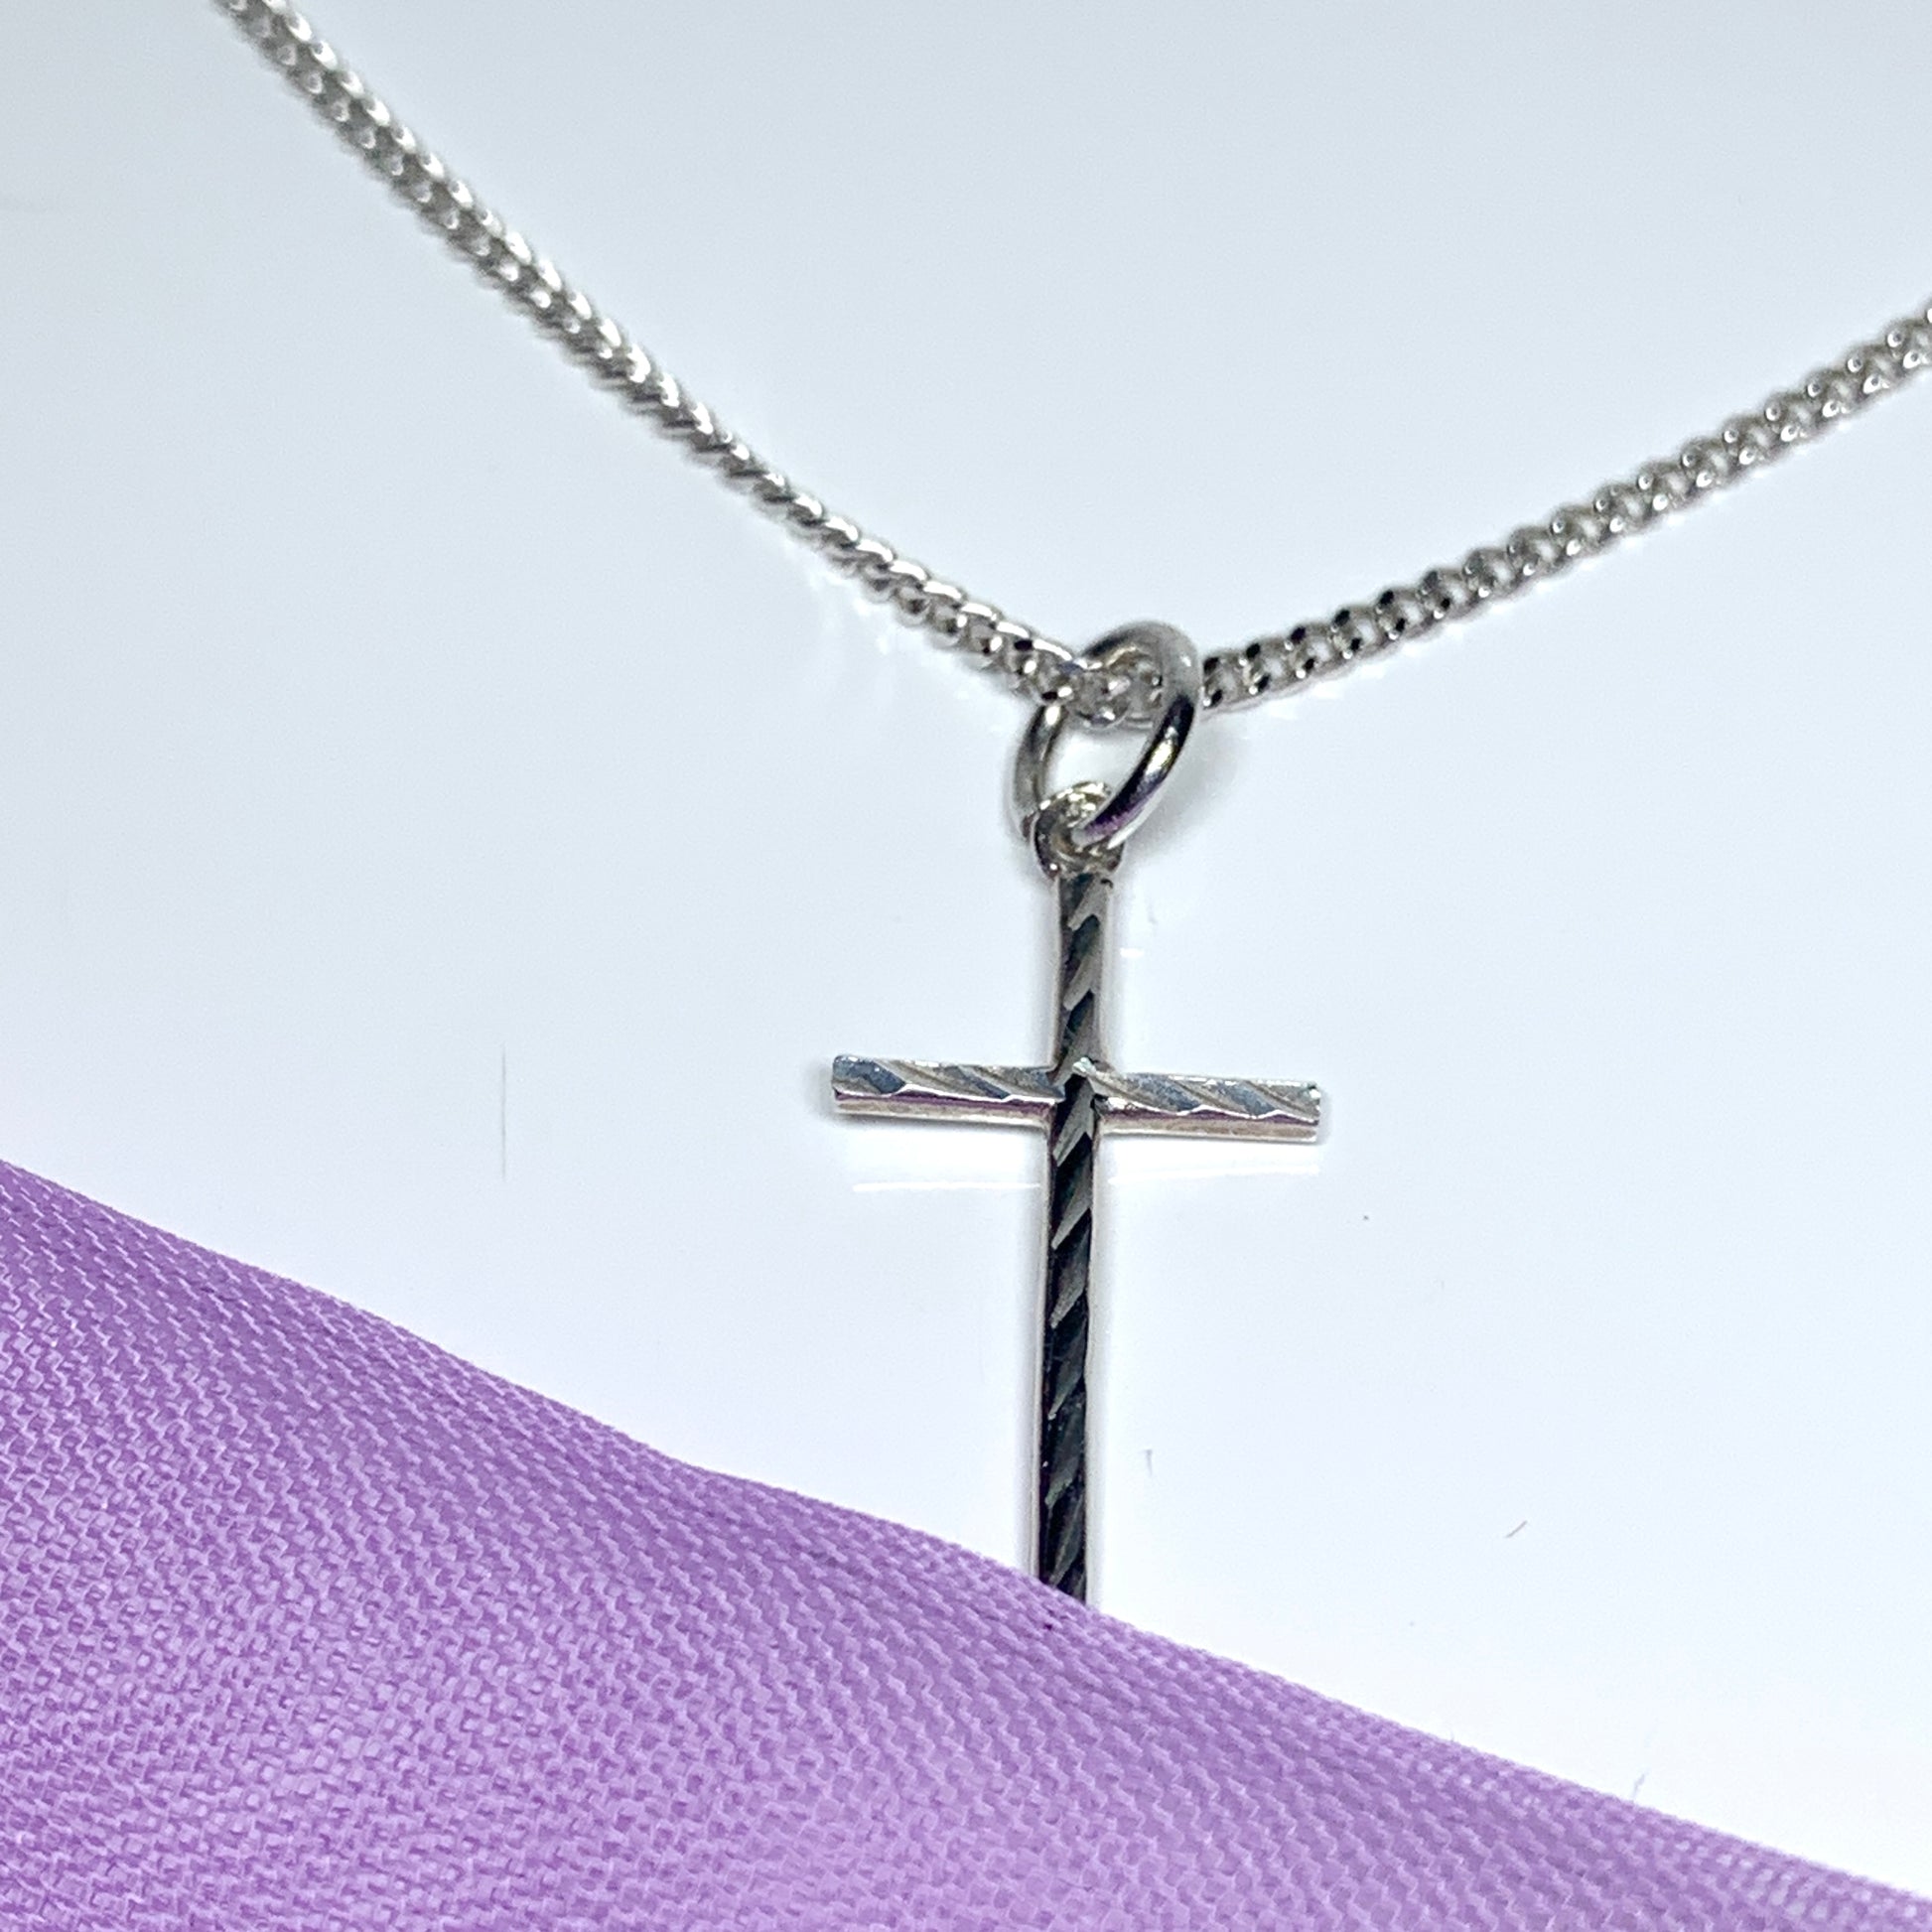 Small solid diamond cut reversible cross patterned sterling silver and chain